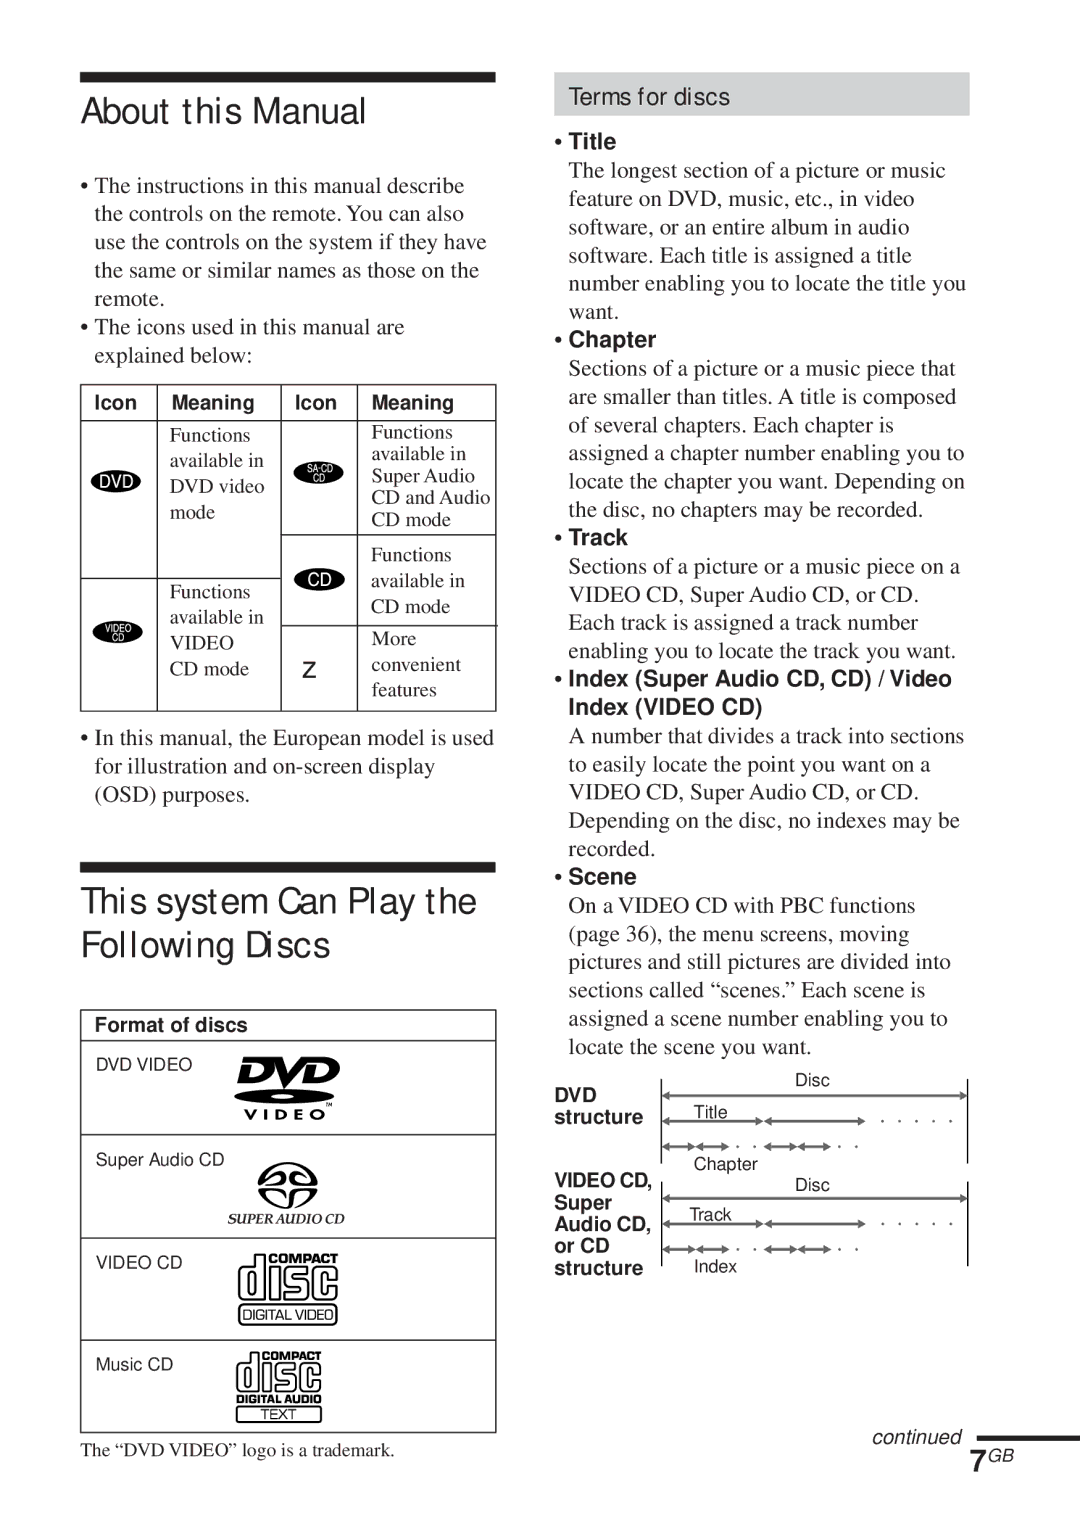 Sony DAV-C450 manual About this Manual, This system Can Play the Following Discs, Terms for discs 